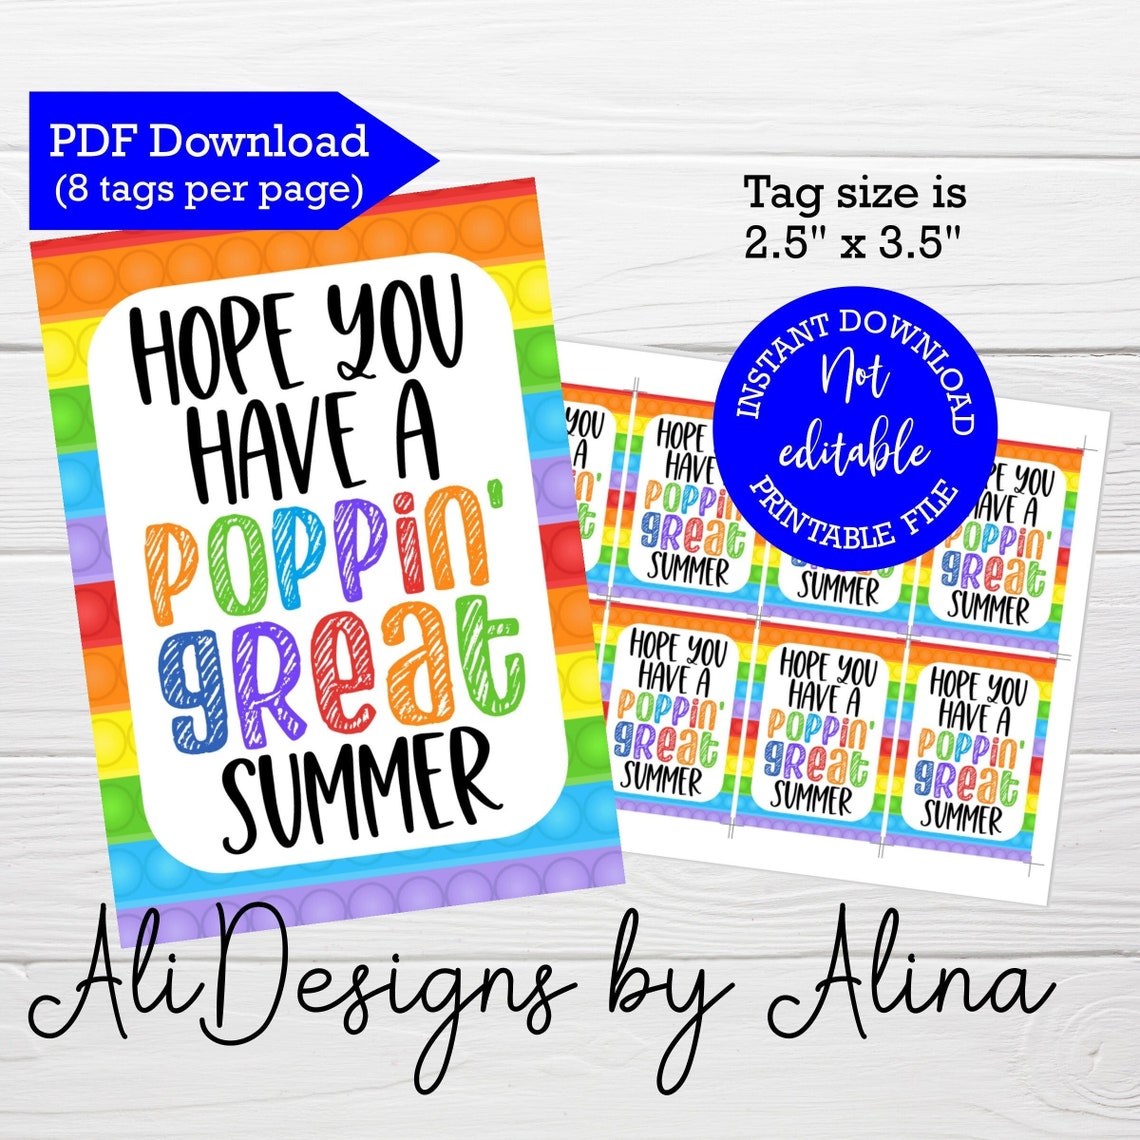 hope-you-have-a-poppin-great-summer-printable-tags-last-day-etsy-india